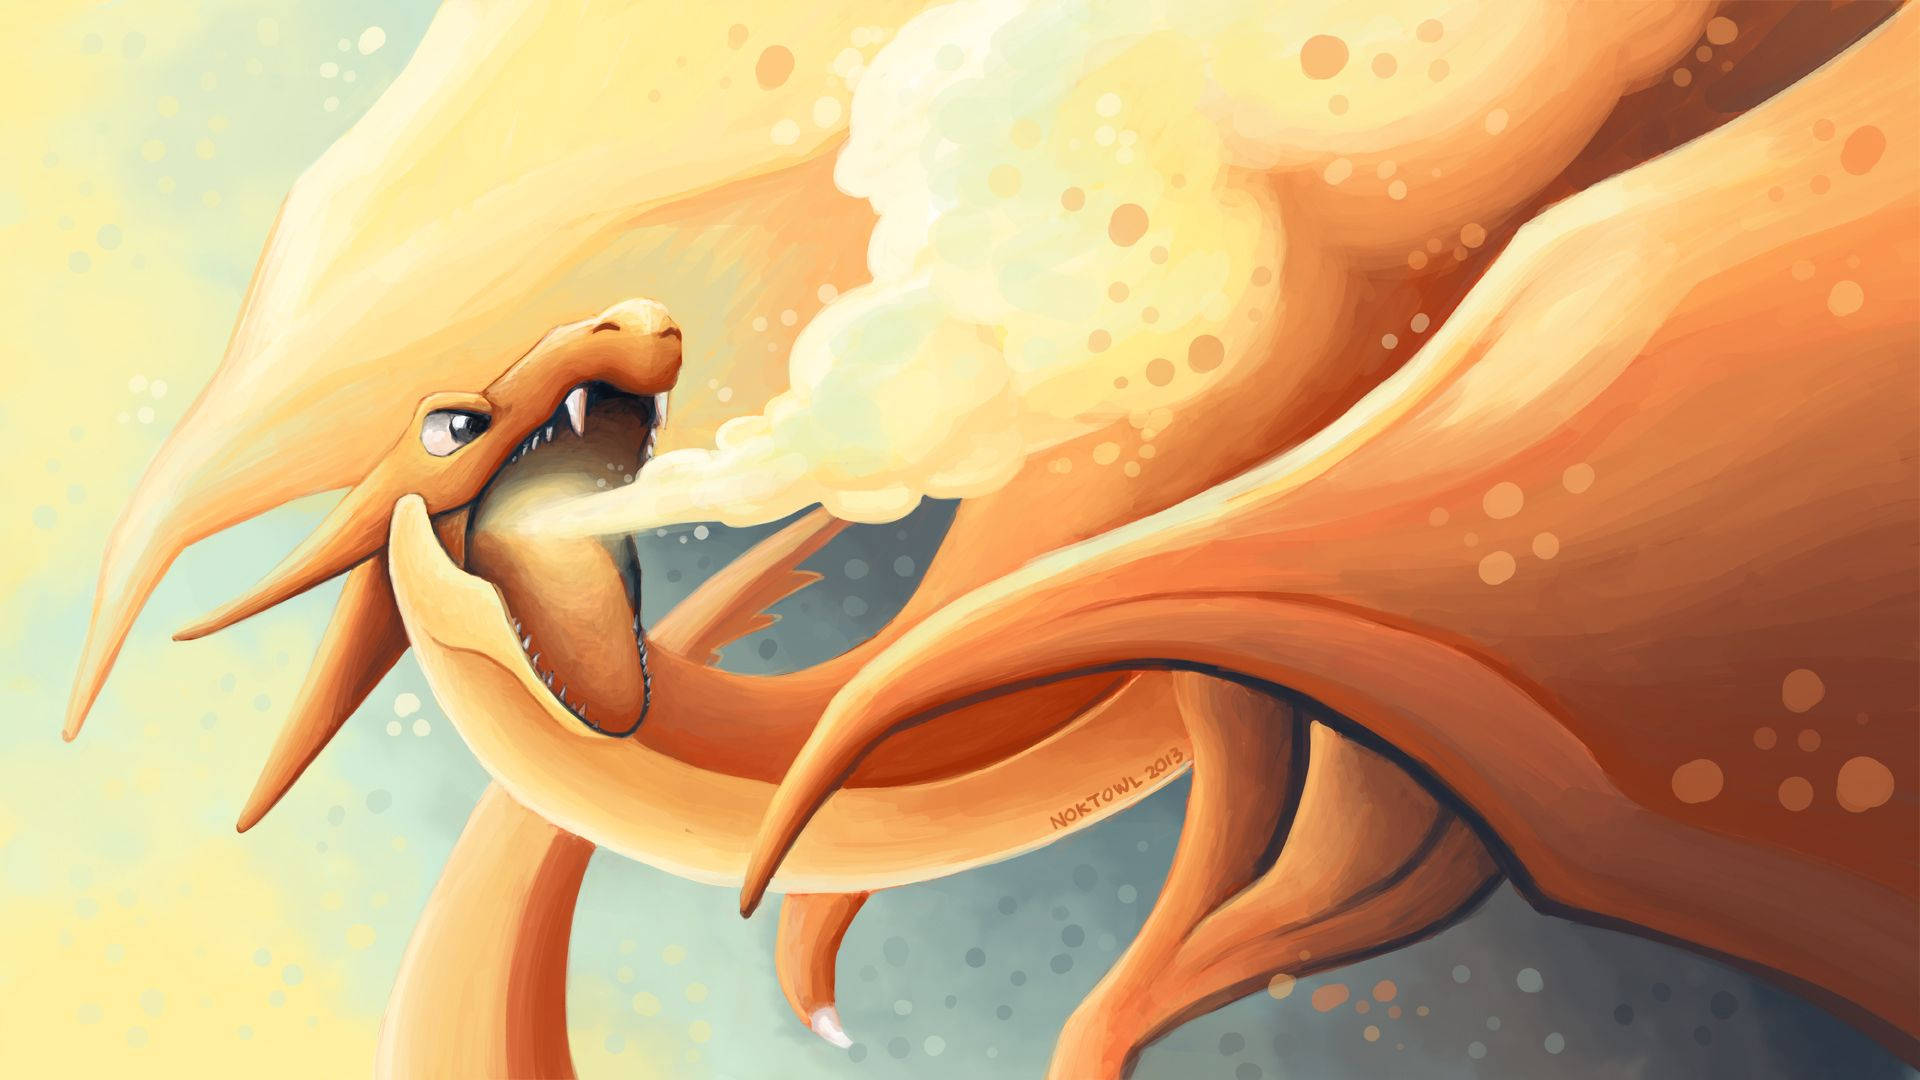 Free Charizard Wallpaper Downloads, [100+] Charizard Wallpapers for FREE |  